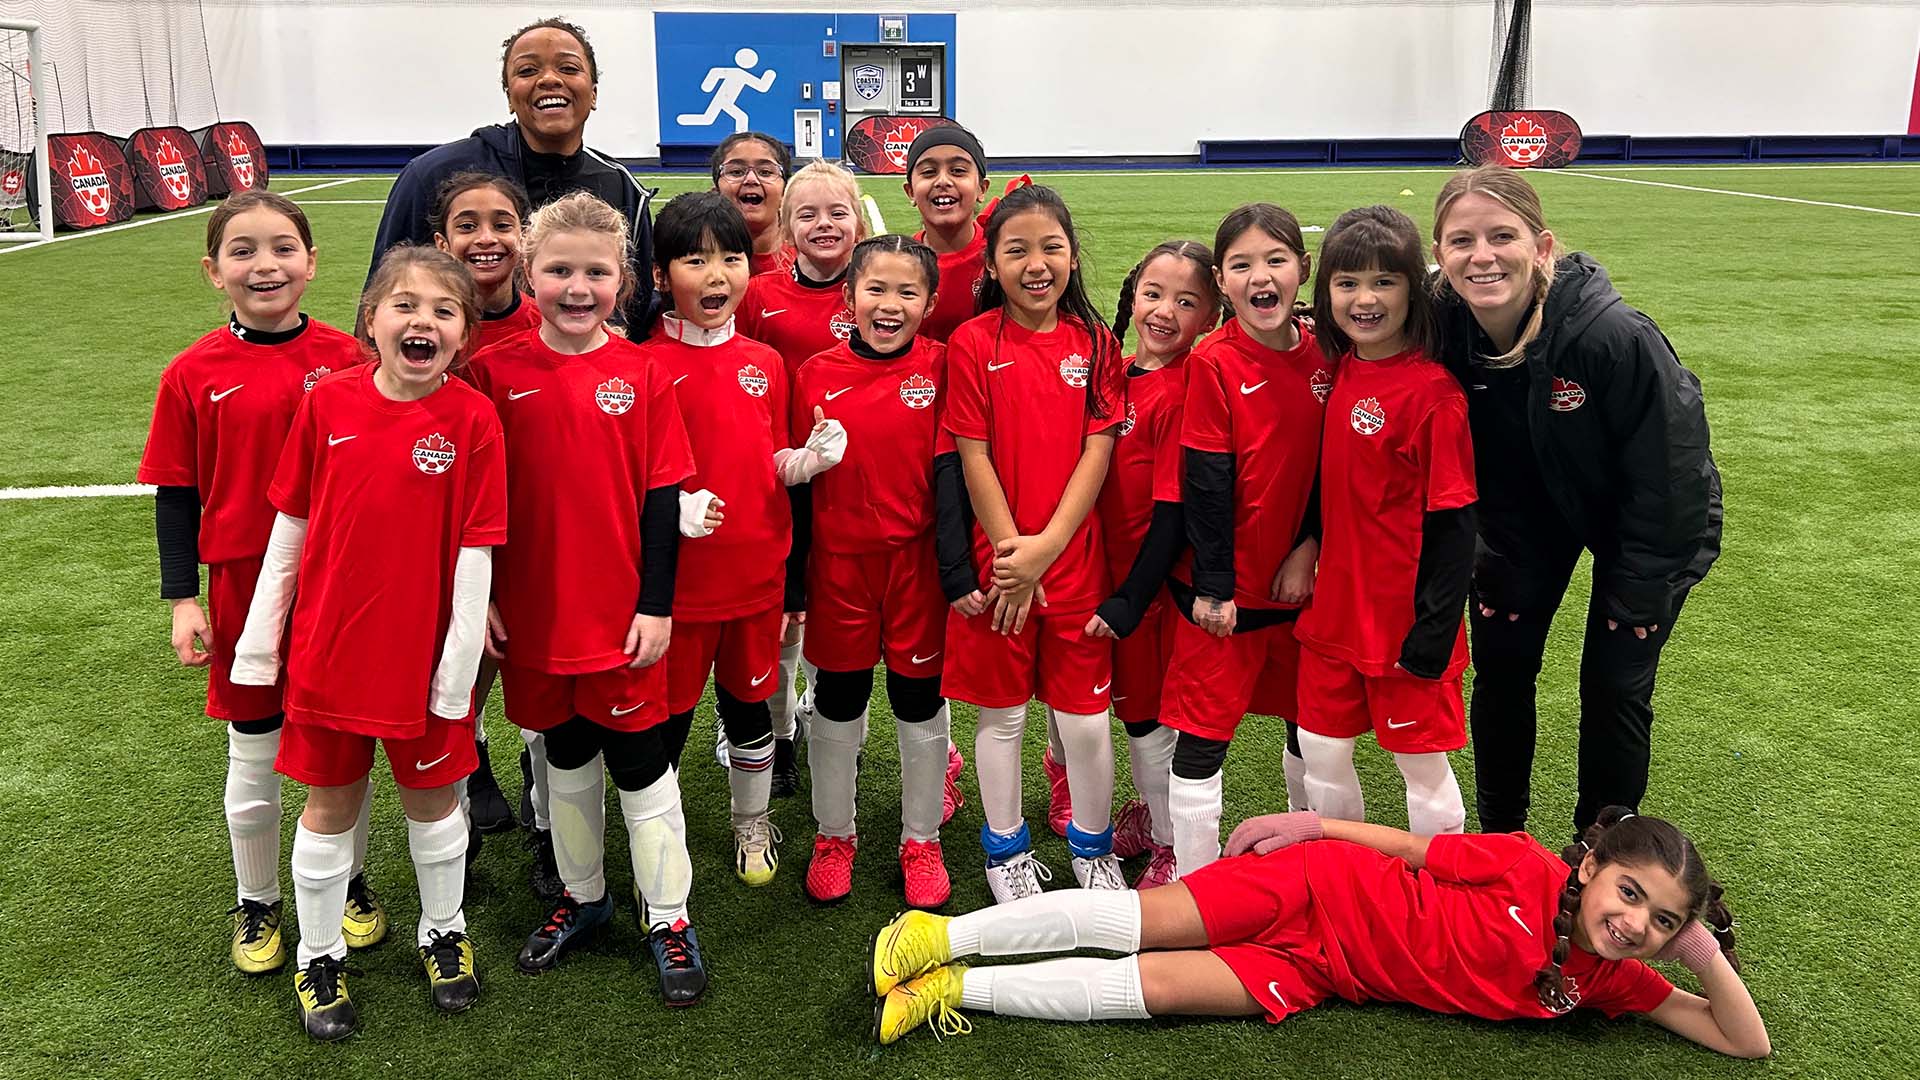 Canada Soccer is investing $1.2 million in grassroots funding through the Community Sports for All initiative